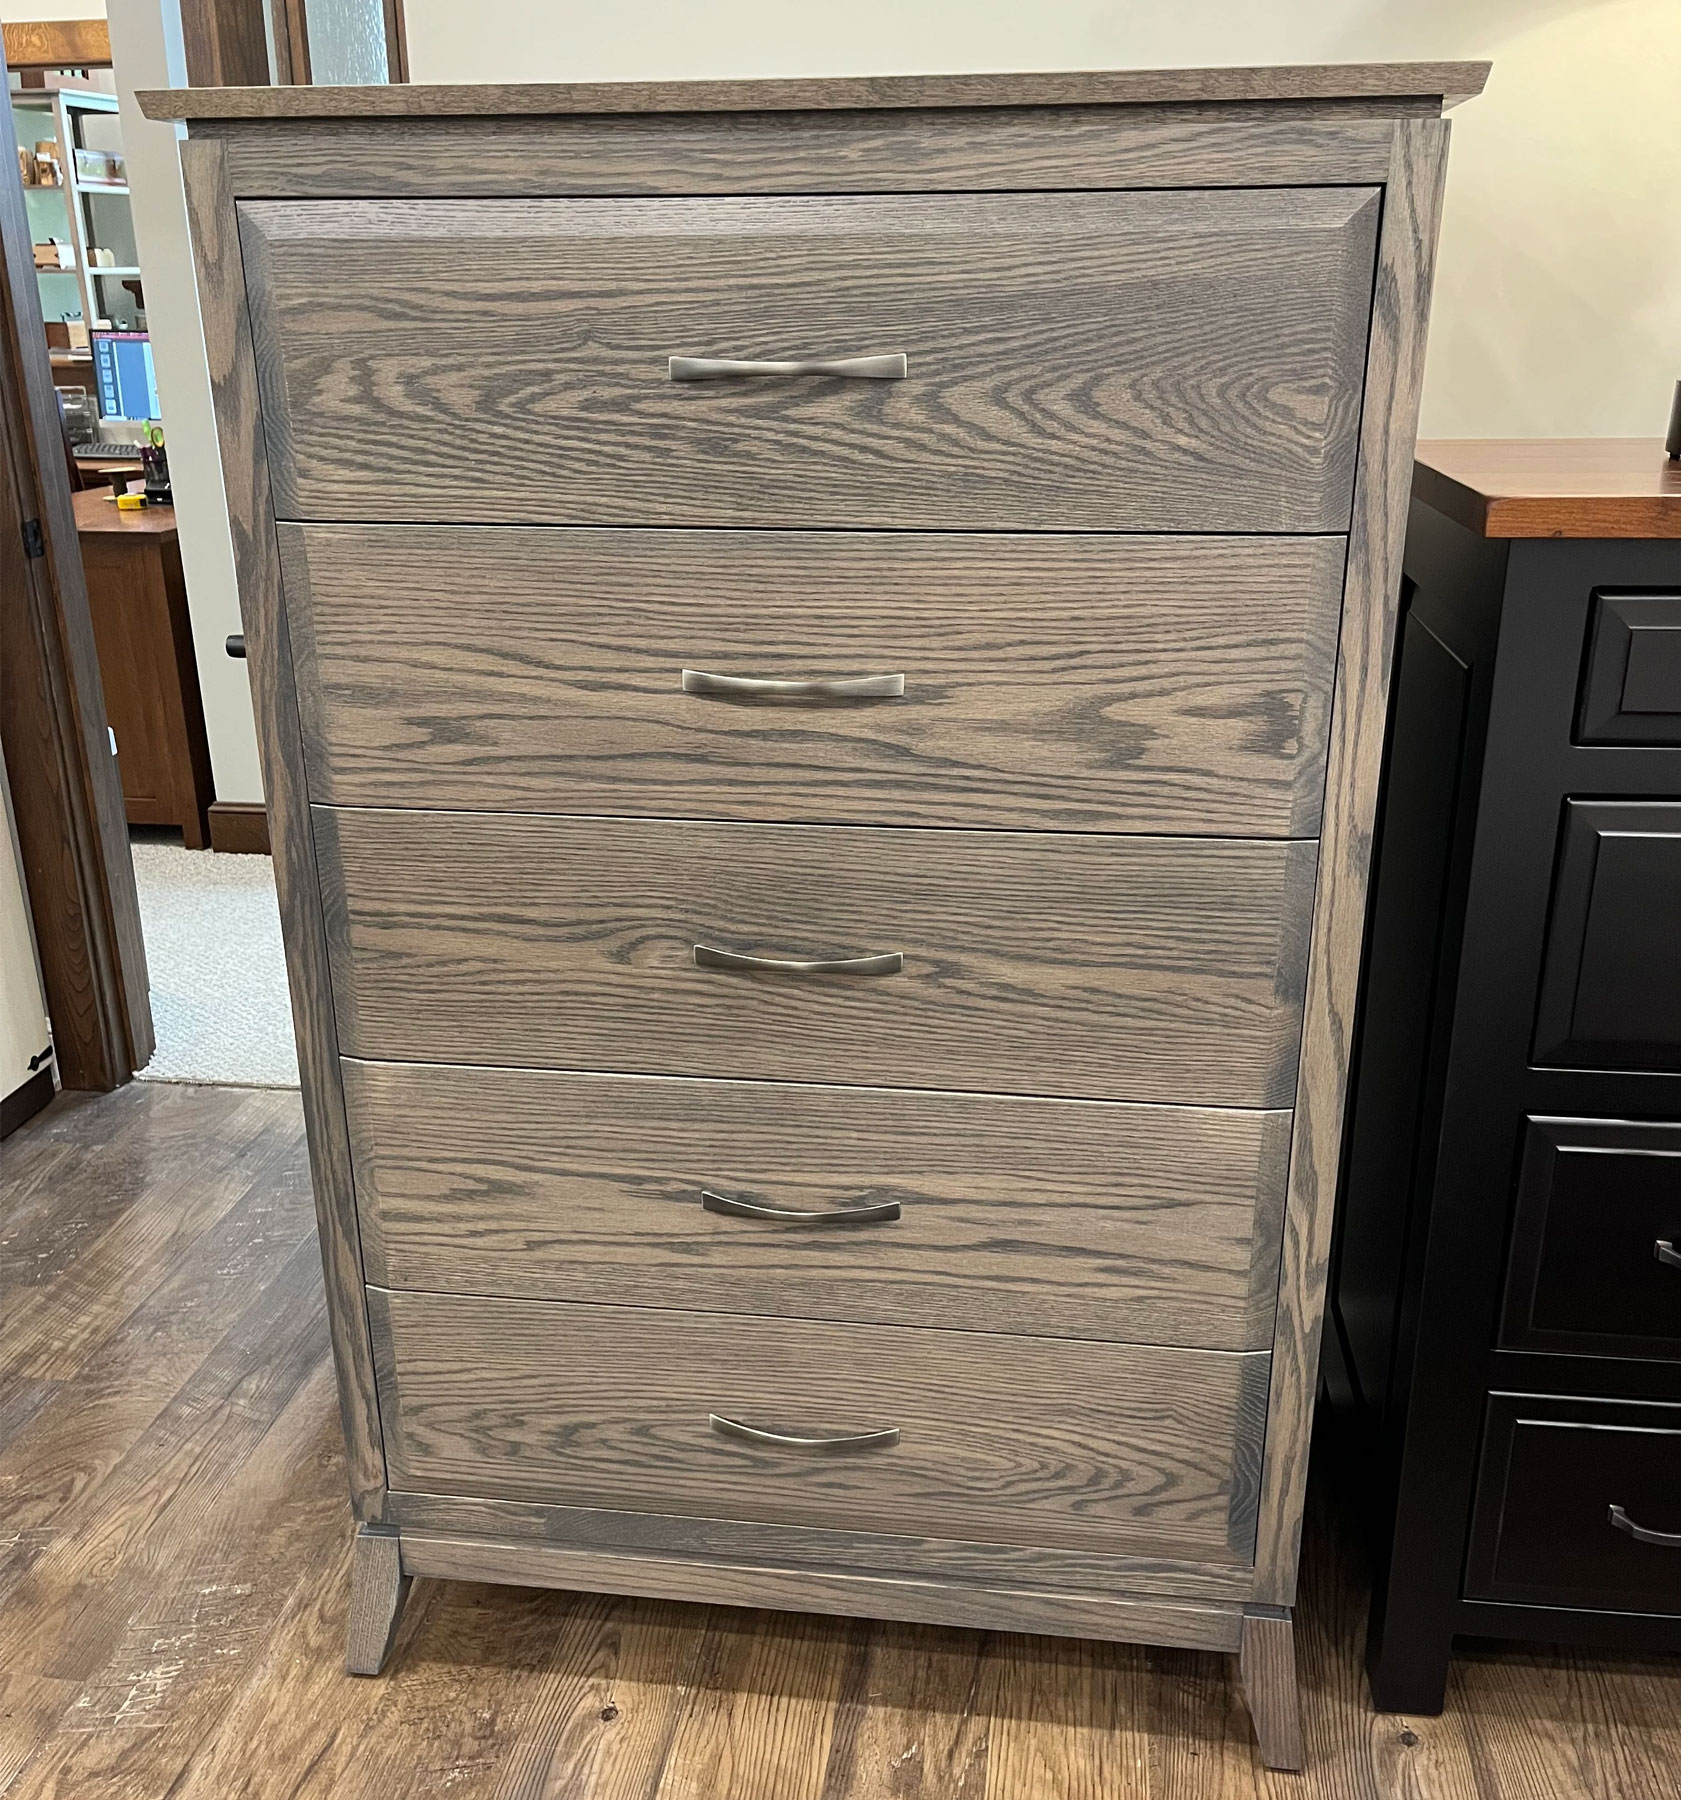 Saratoga Chest of Drawers in Red Oak